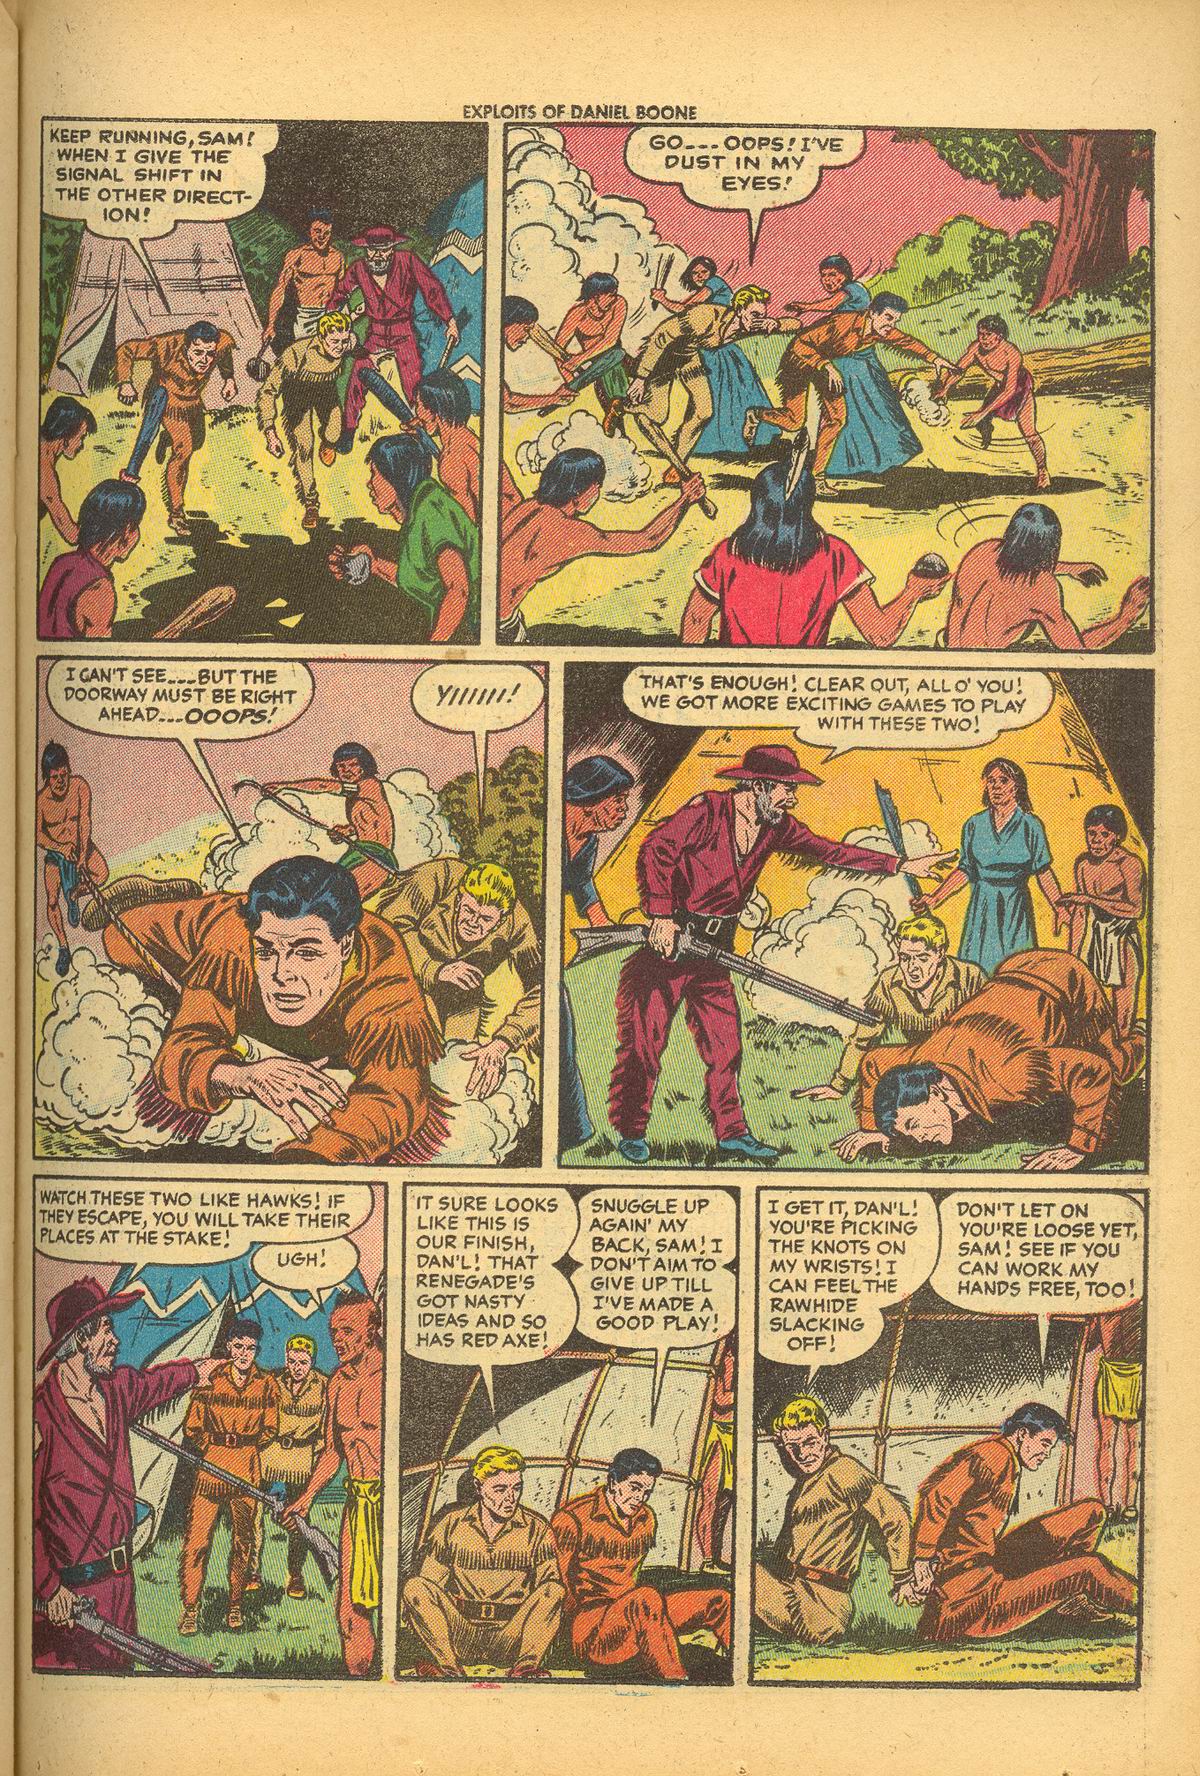 Read online Exploits of Daniel Boone comic -  Issue #2 - 23